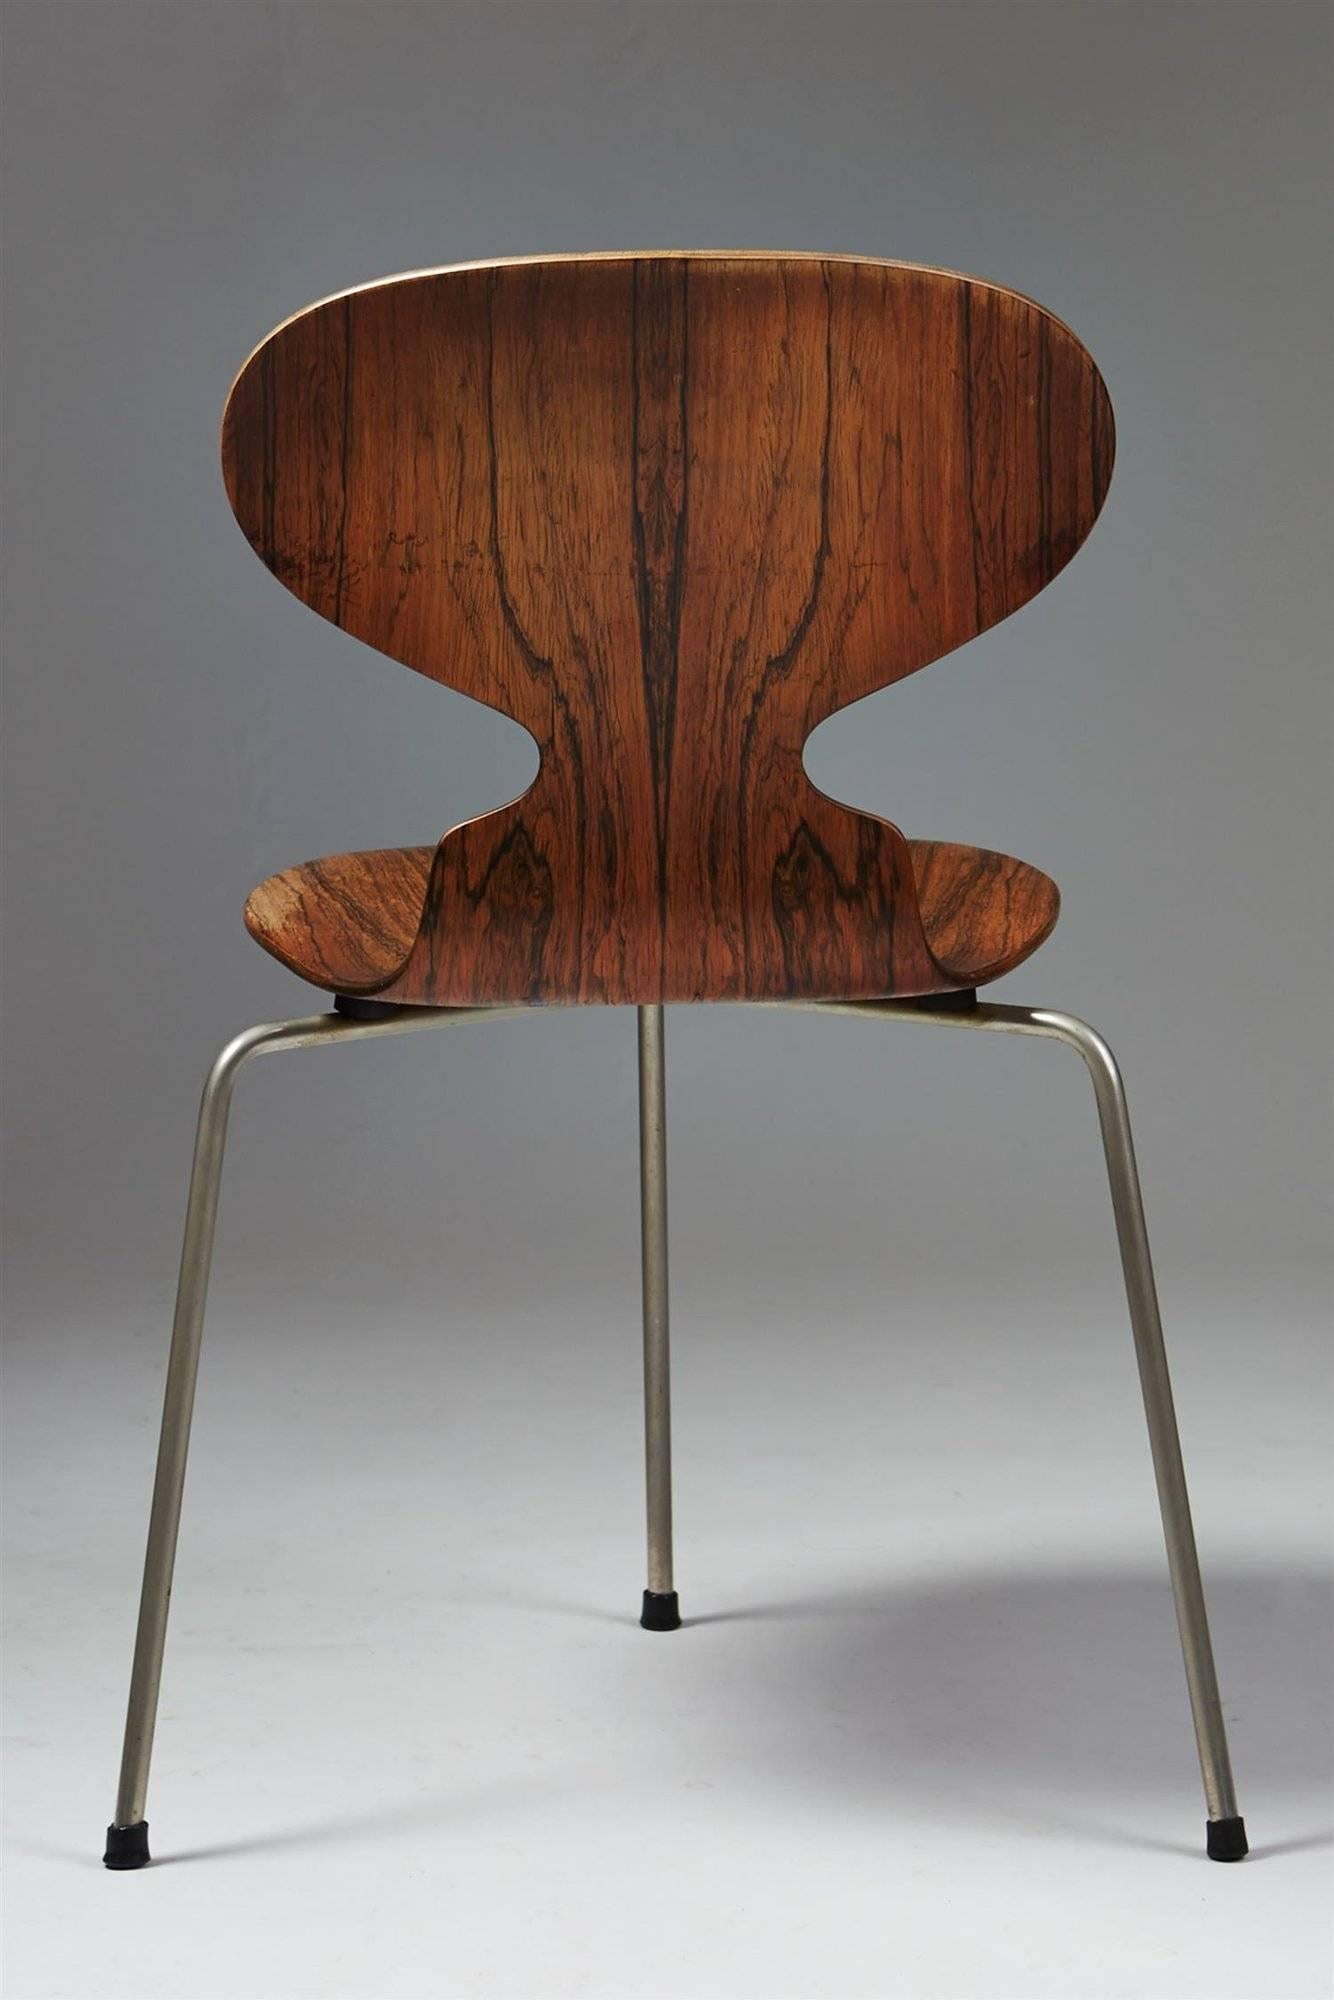 Rosewood Dining Table and Four Chairs, Designed by Arne Jacobsen for Fritz Hansen